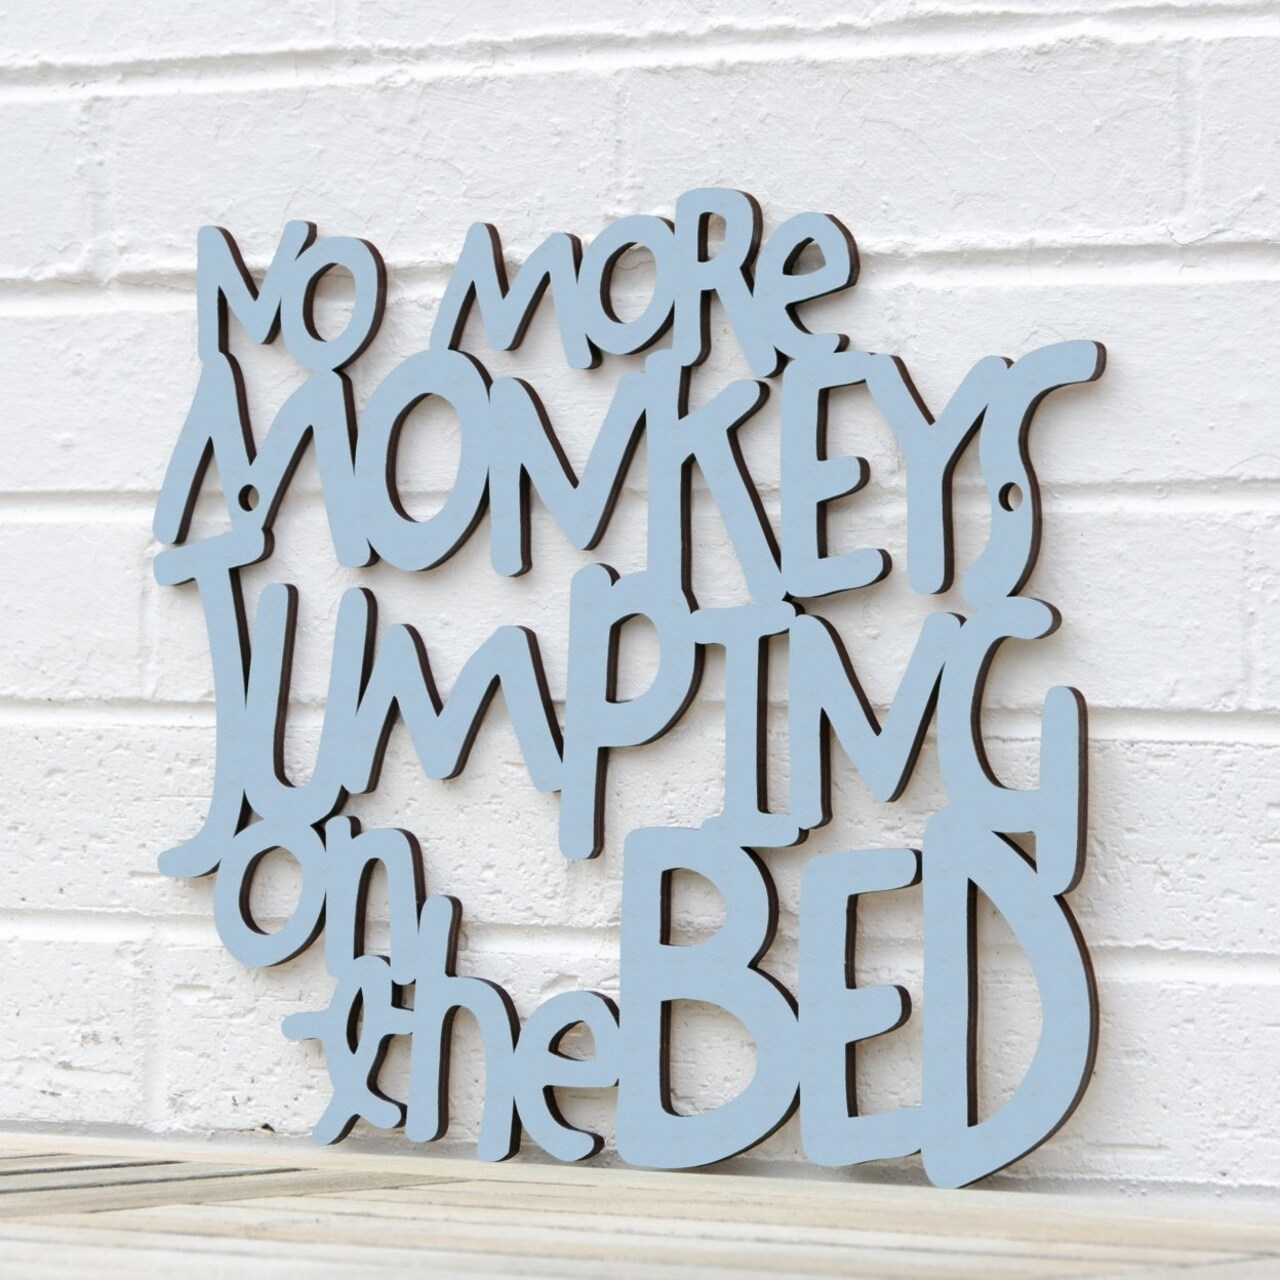 Spunky Fluff No More Monkeys Jumping On The Bed, Kids Playroom Wall Art